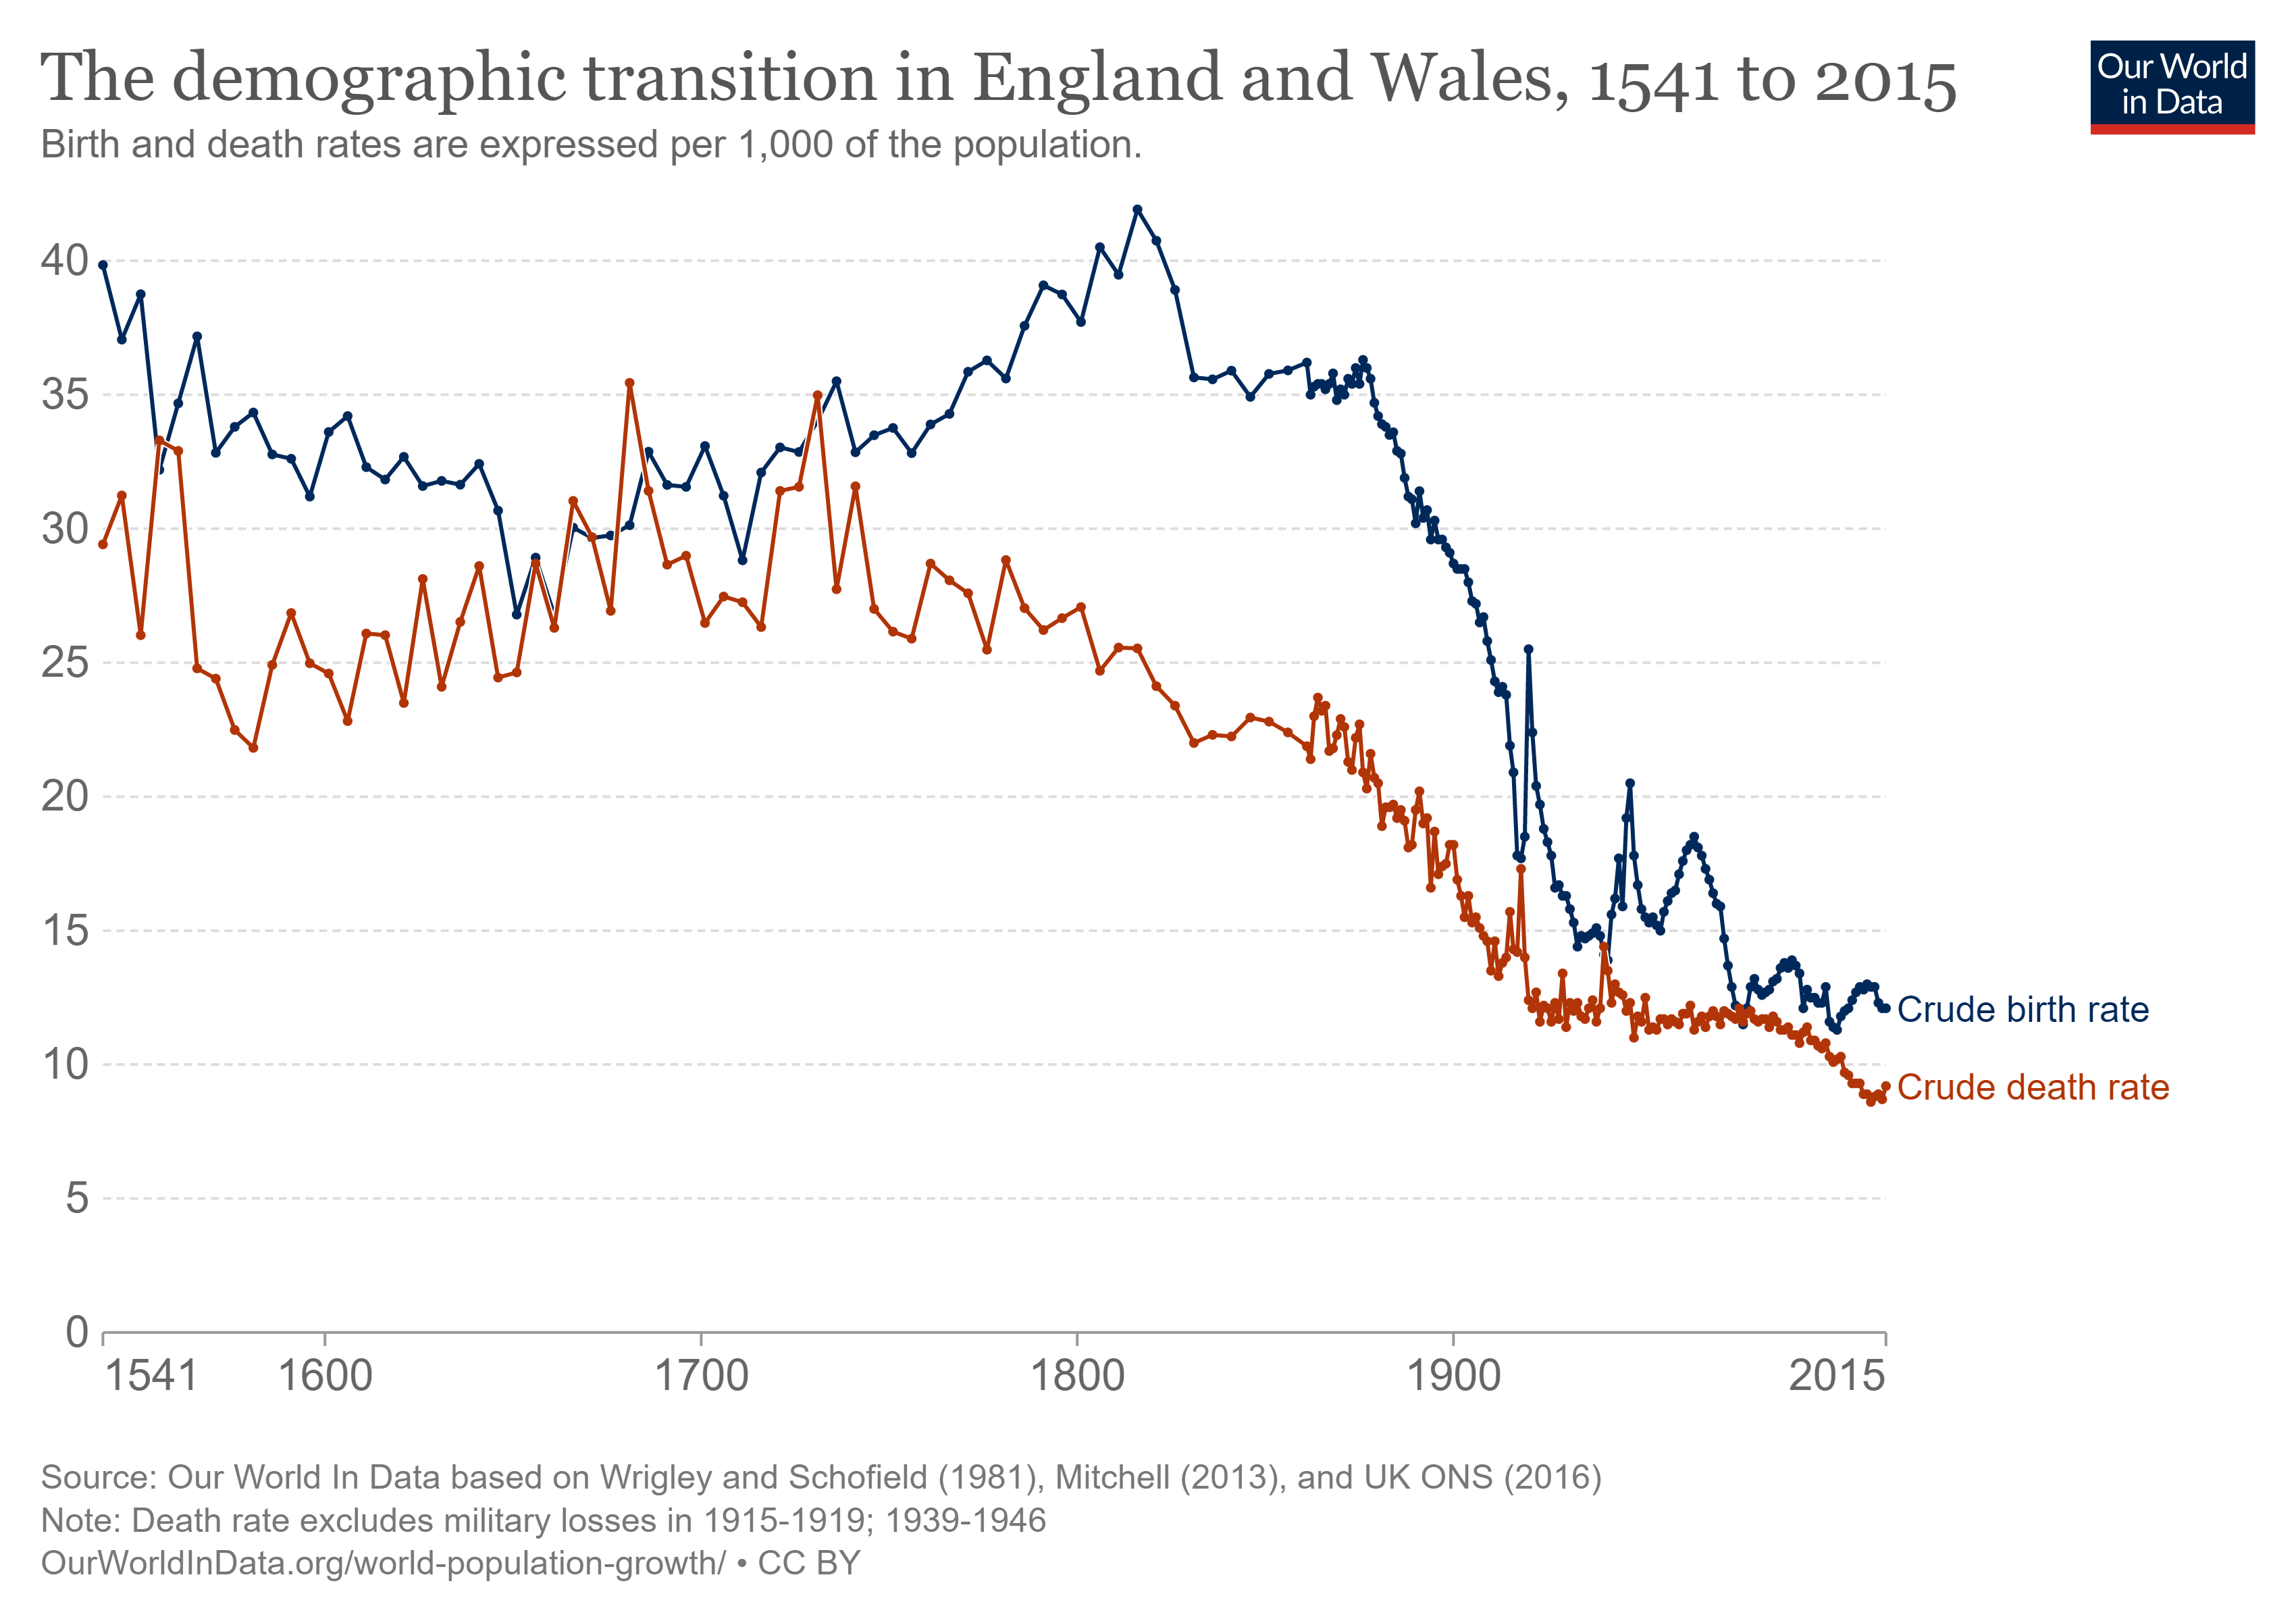 This graph shows the birth rate rising between 1741 and 1816 while the death rate falls. After 1816 both rates fall together and have come close together by 1936.